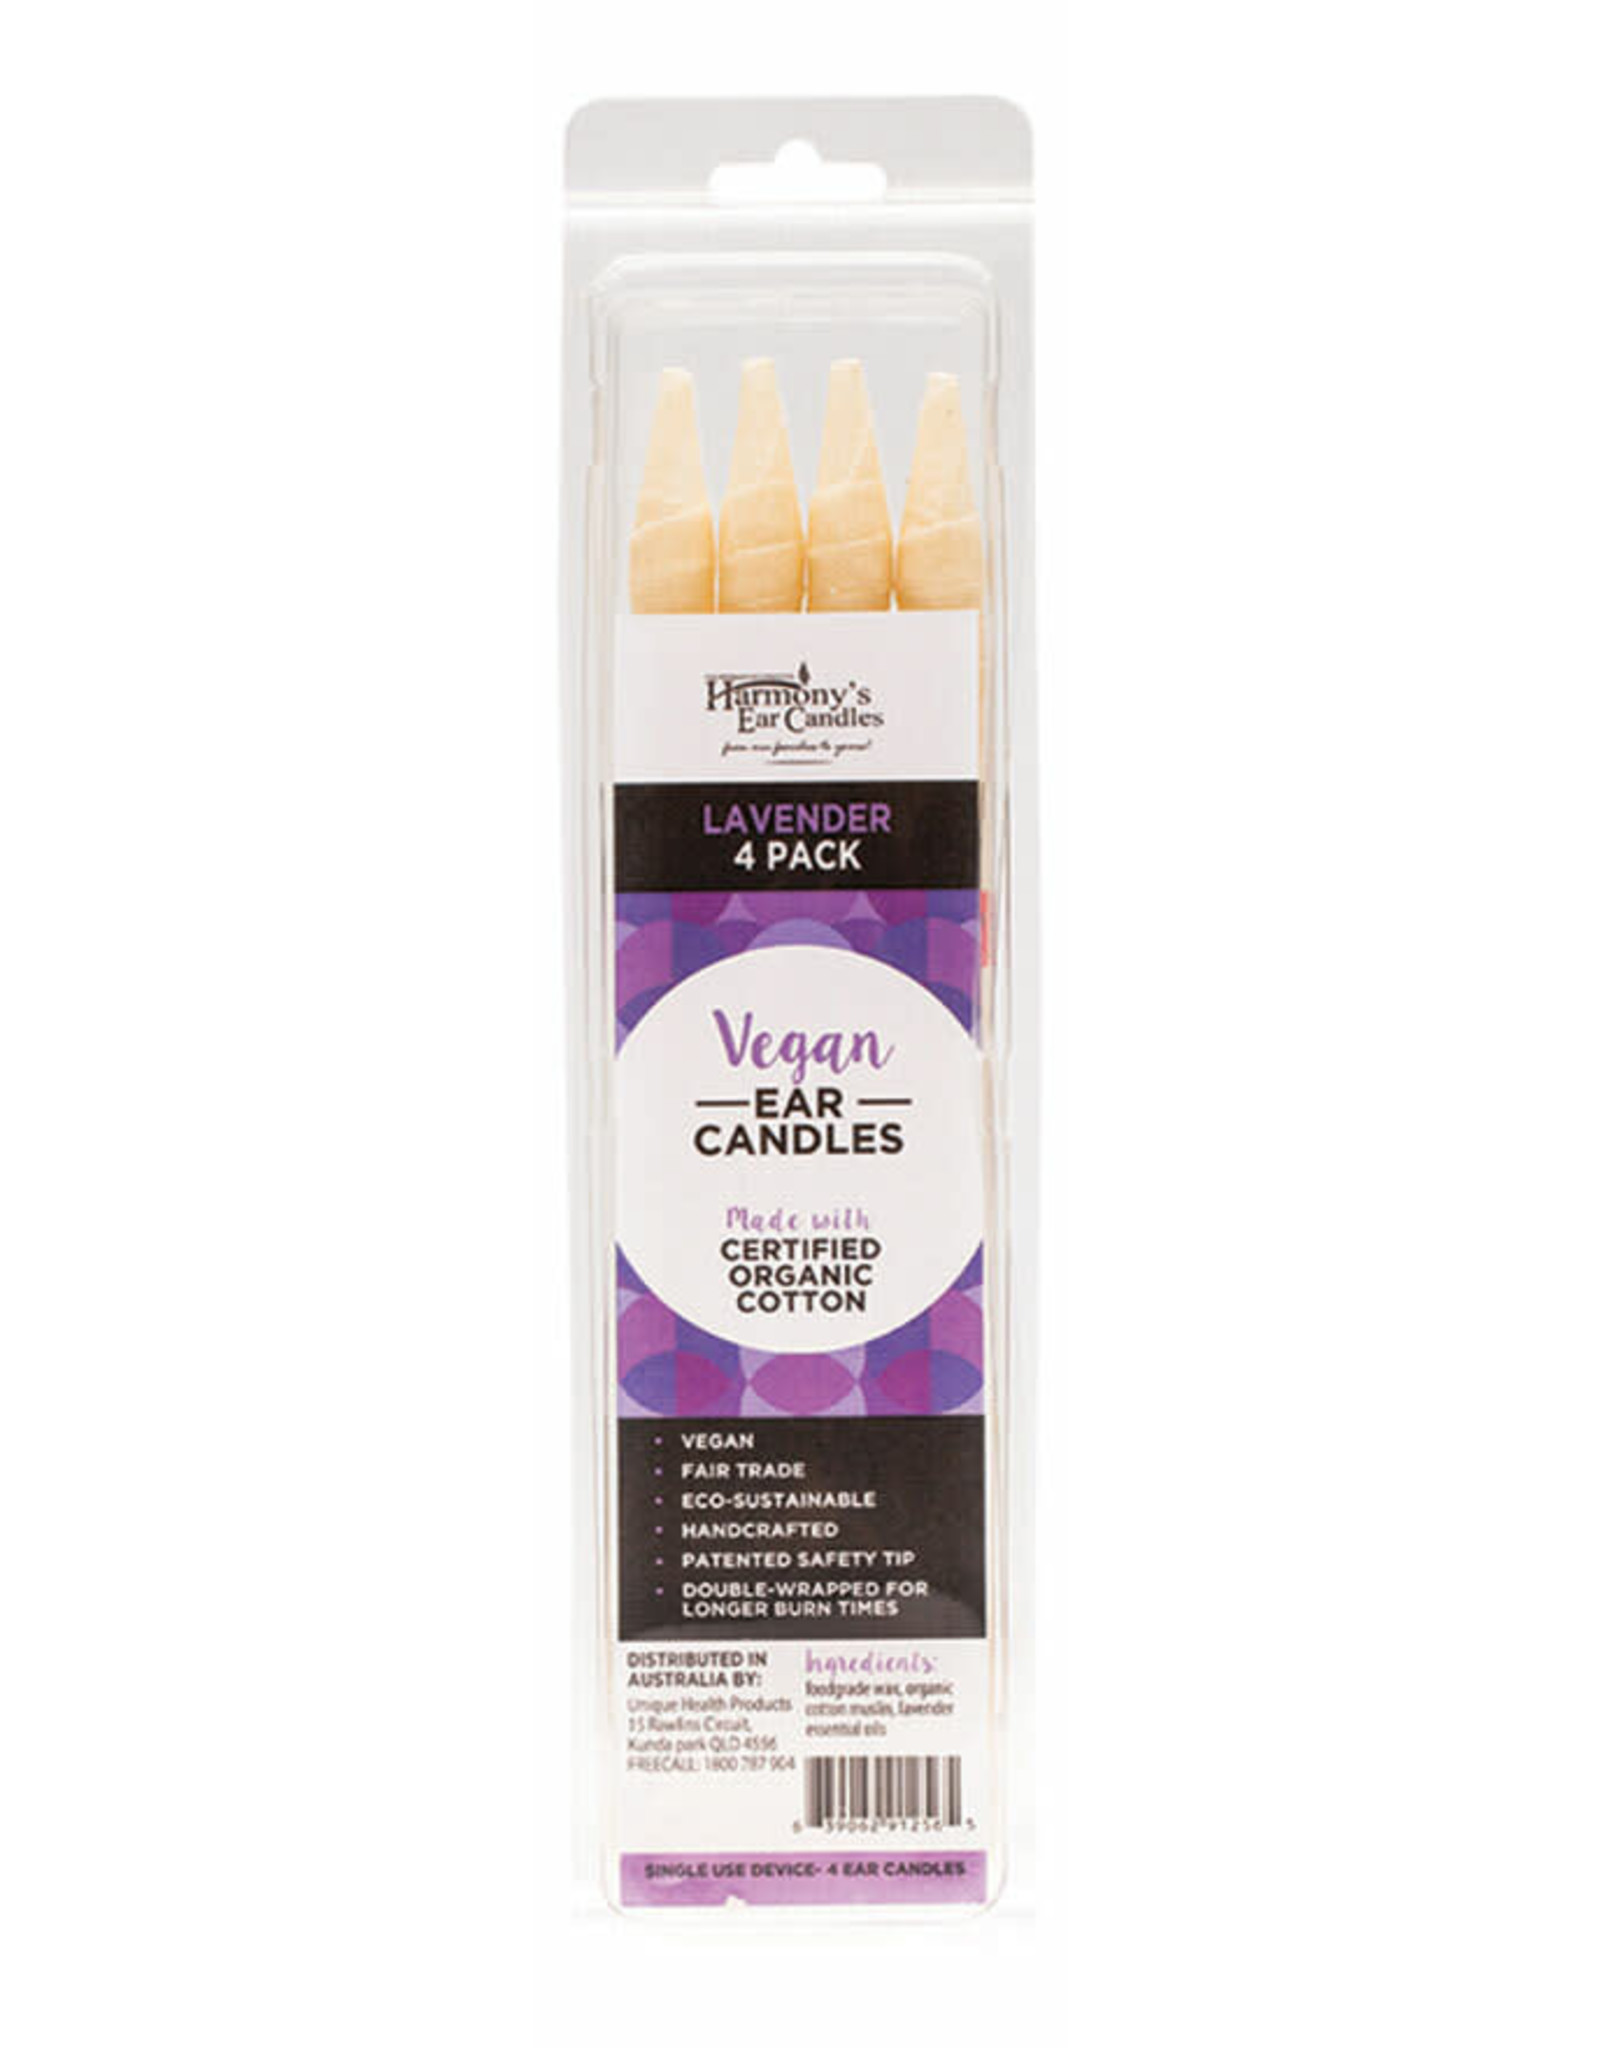 Harmony's Ear Candles Vegan Ear Candles  Lavender Scented